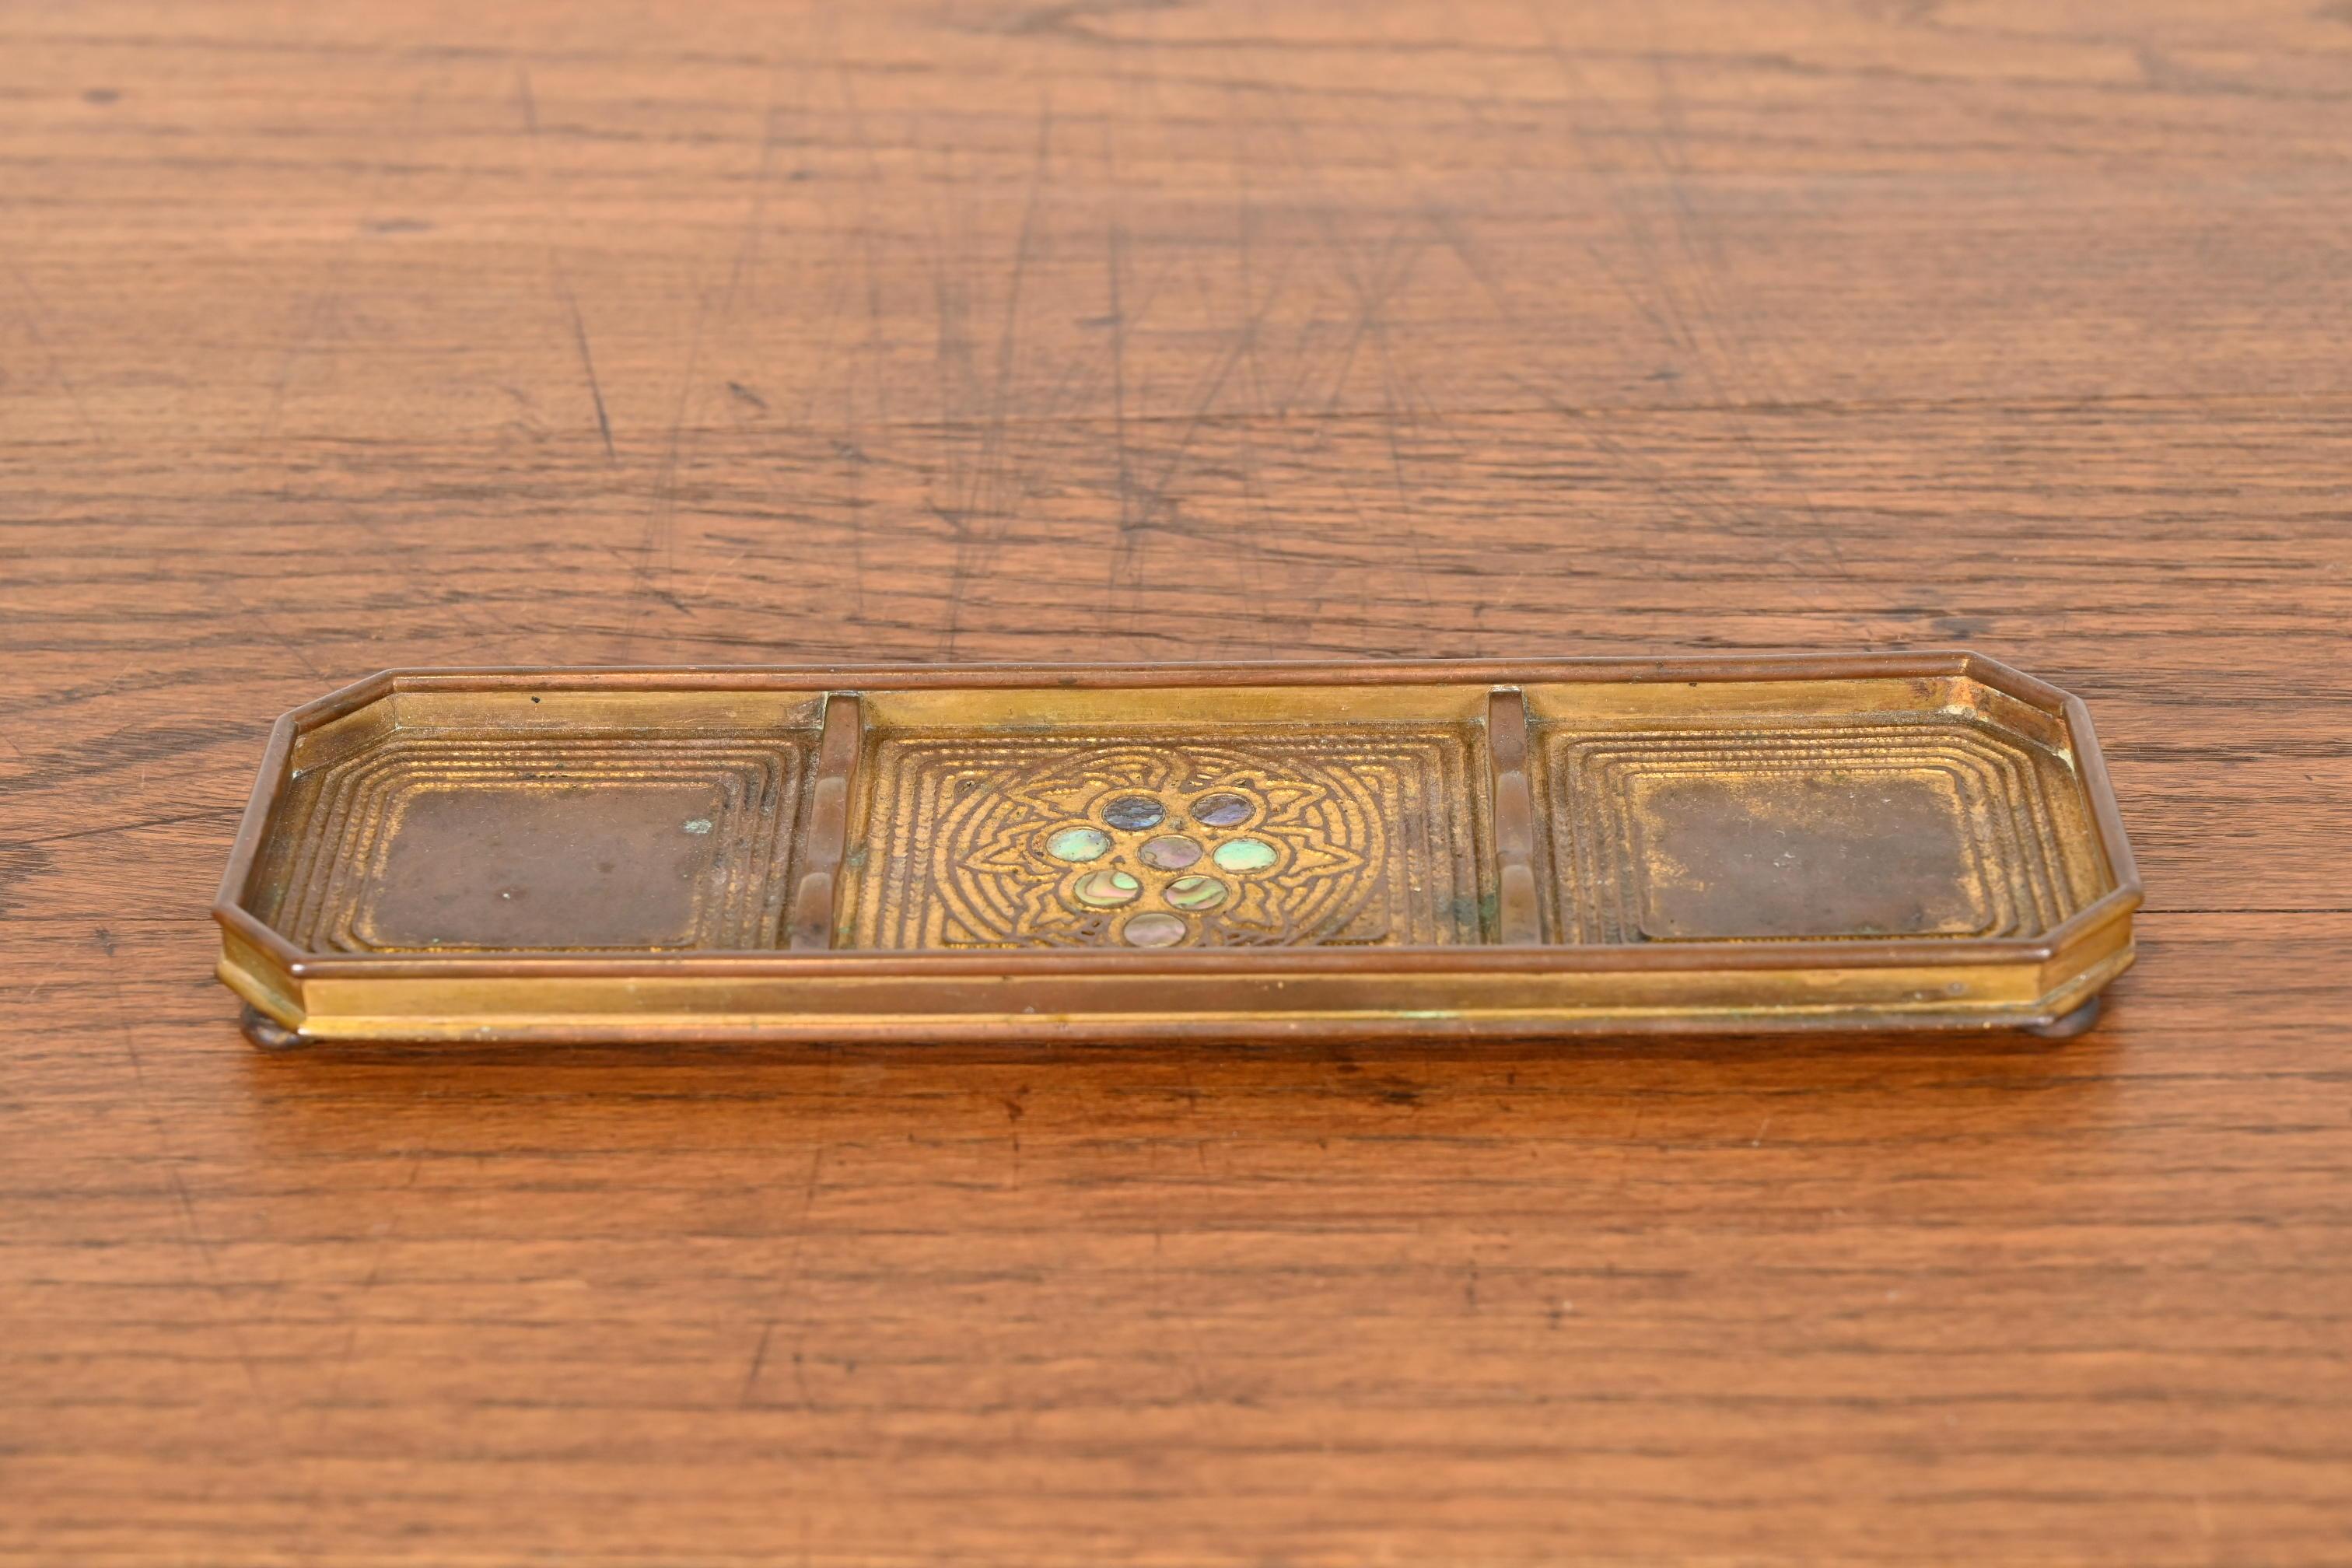 Tiffany Studios New York Bronze Doré and Abalone Pen Tray In Good Condition For Sale In South Bend, IN